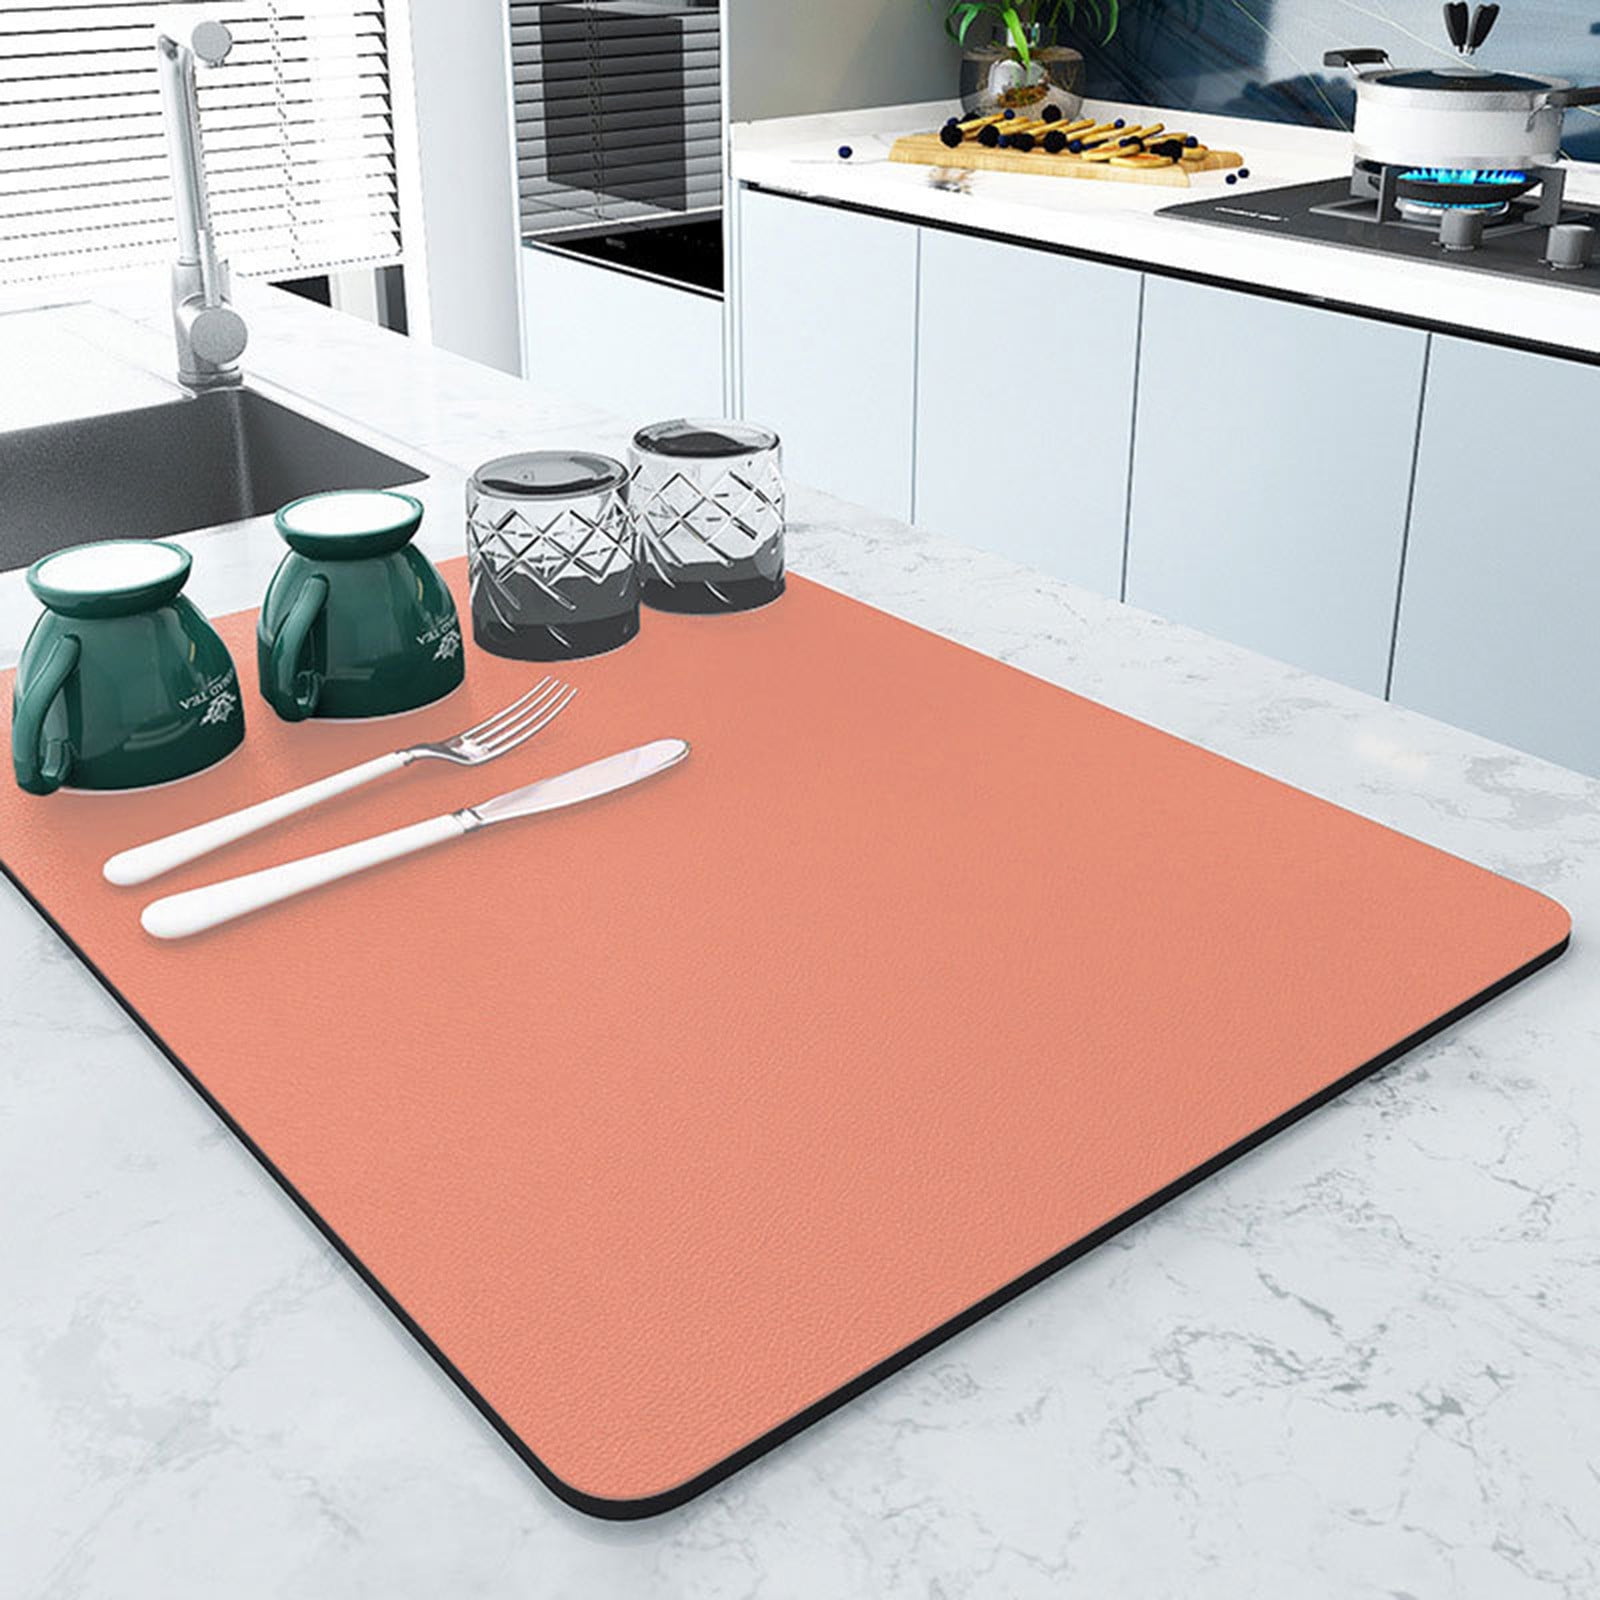 Tiitstoy Kitchen Countertop Mat, Soft Diatomaceous Mud Absorbent